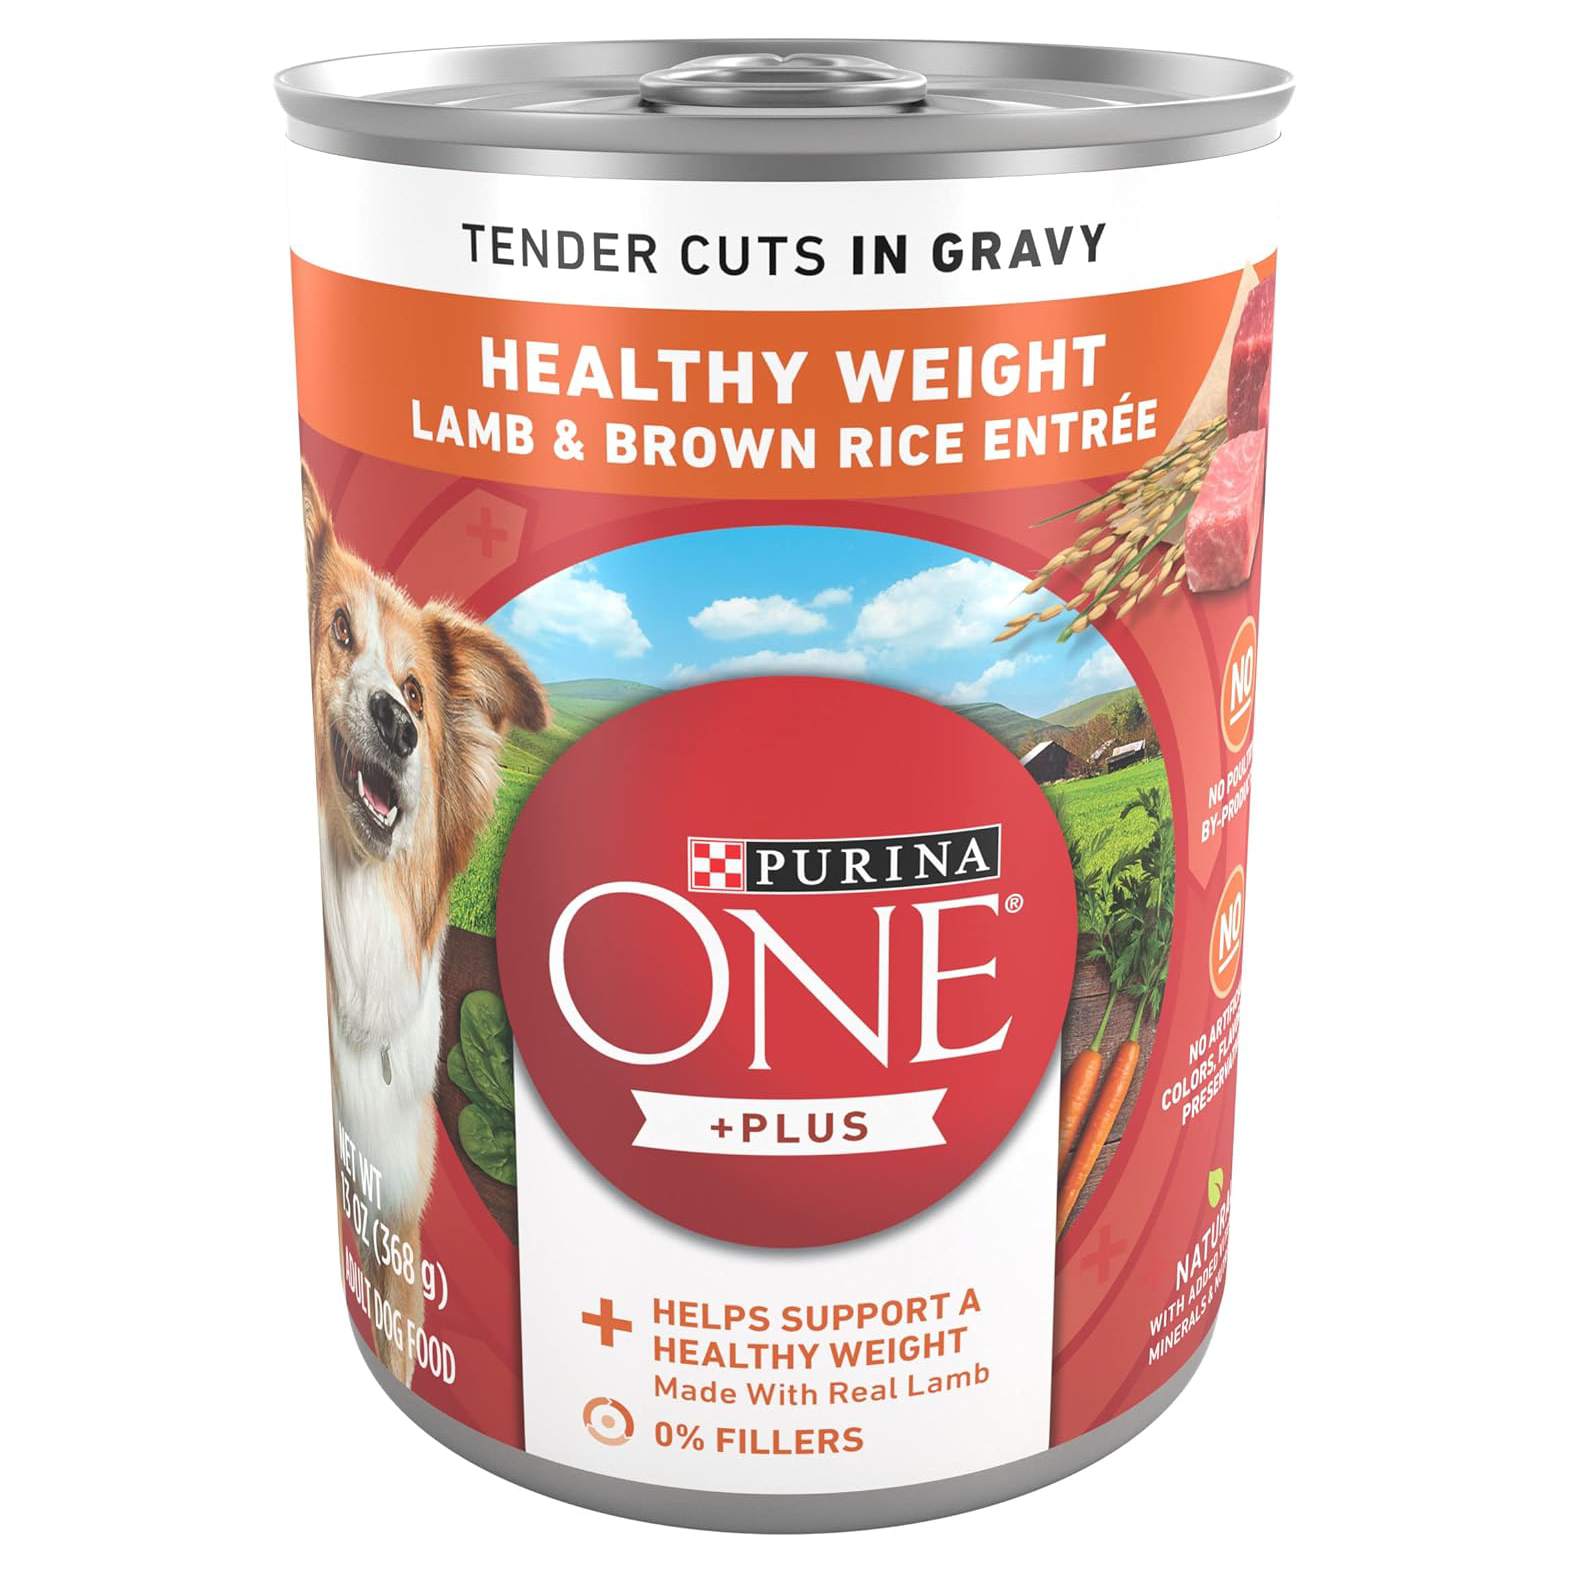 Purina ONE +Plus Healthy Weight Canned Food